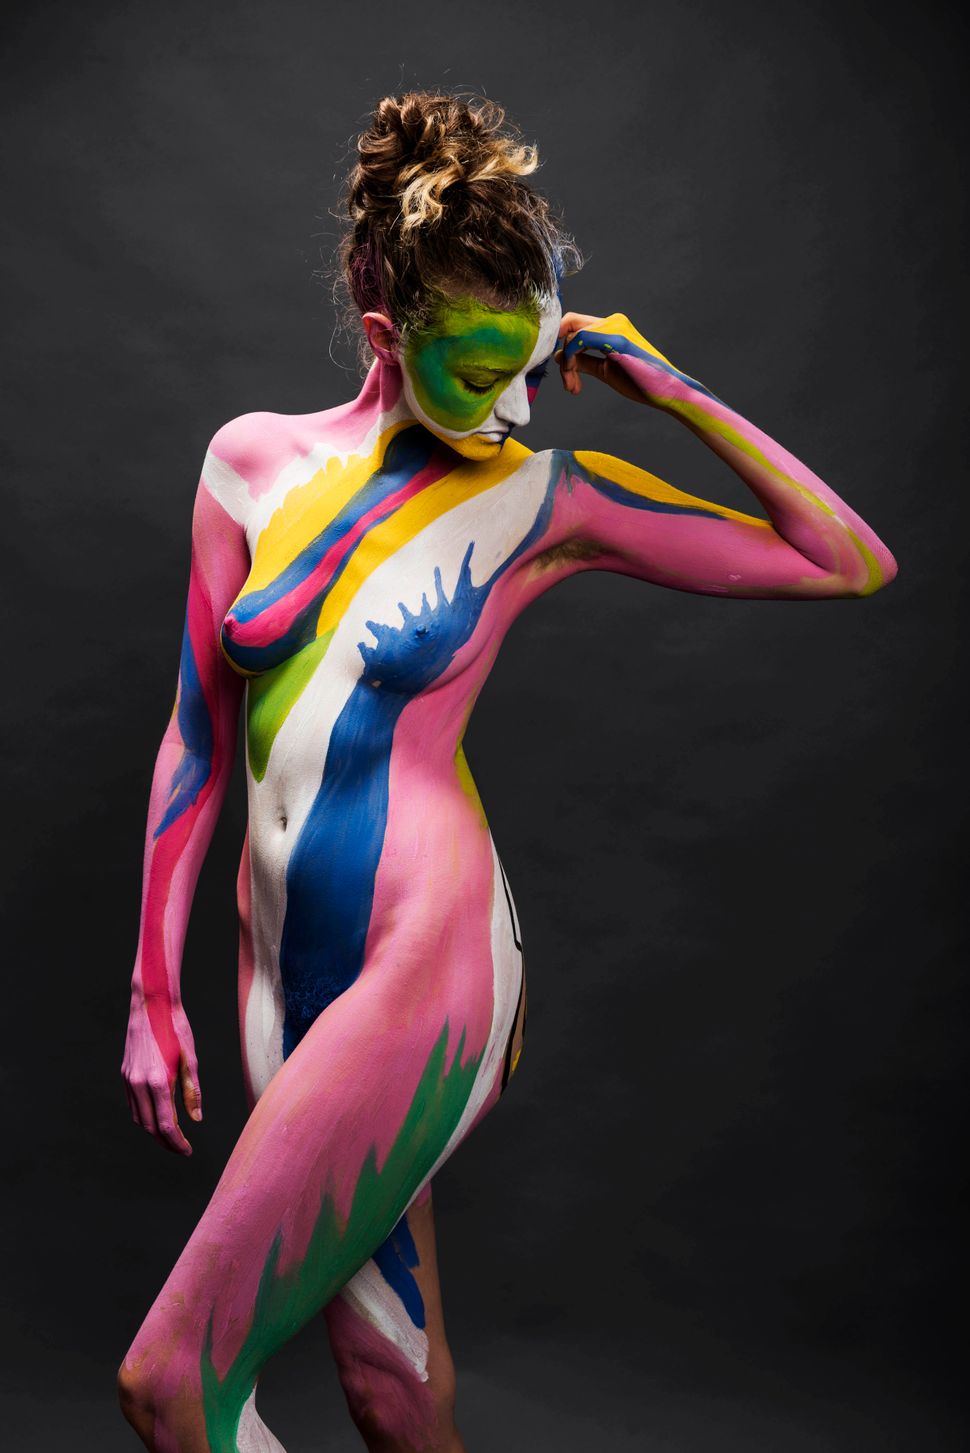 This Is What Its Like To Strip And Get Body Painted For The First